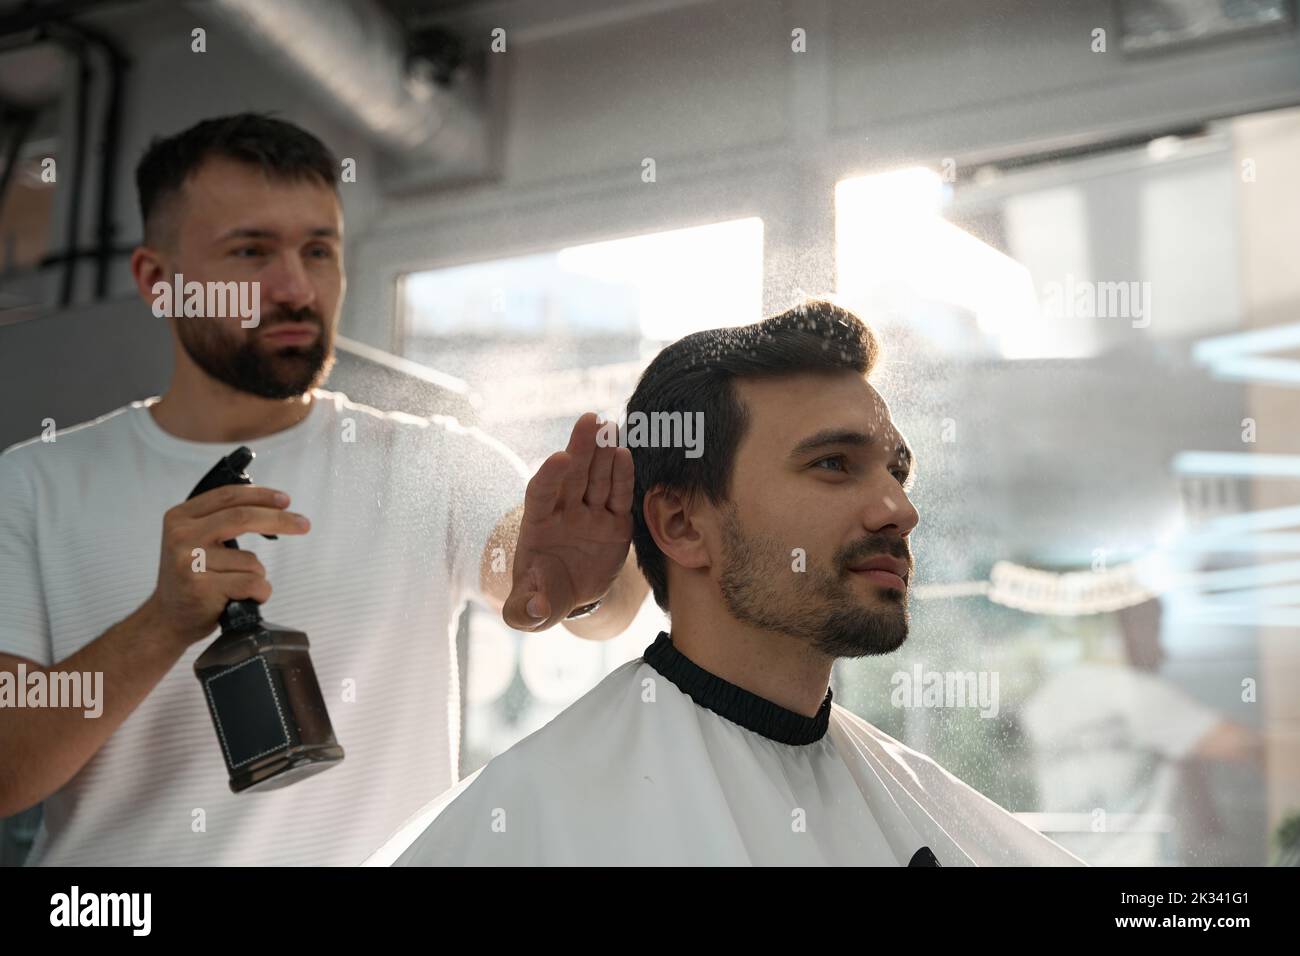 Professional barber moisturizing his client hair before trimming it Stock Photo